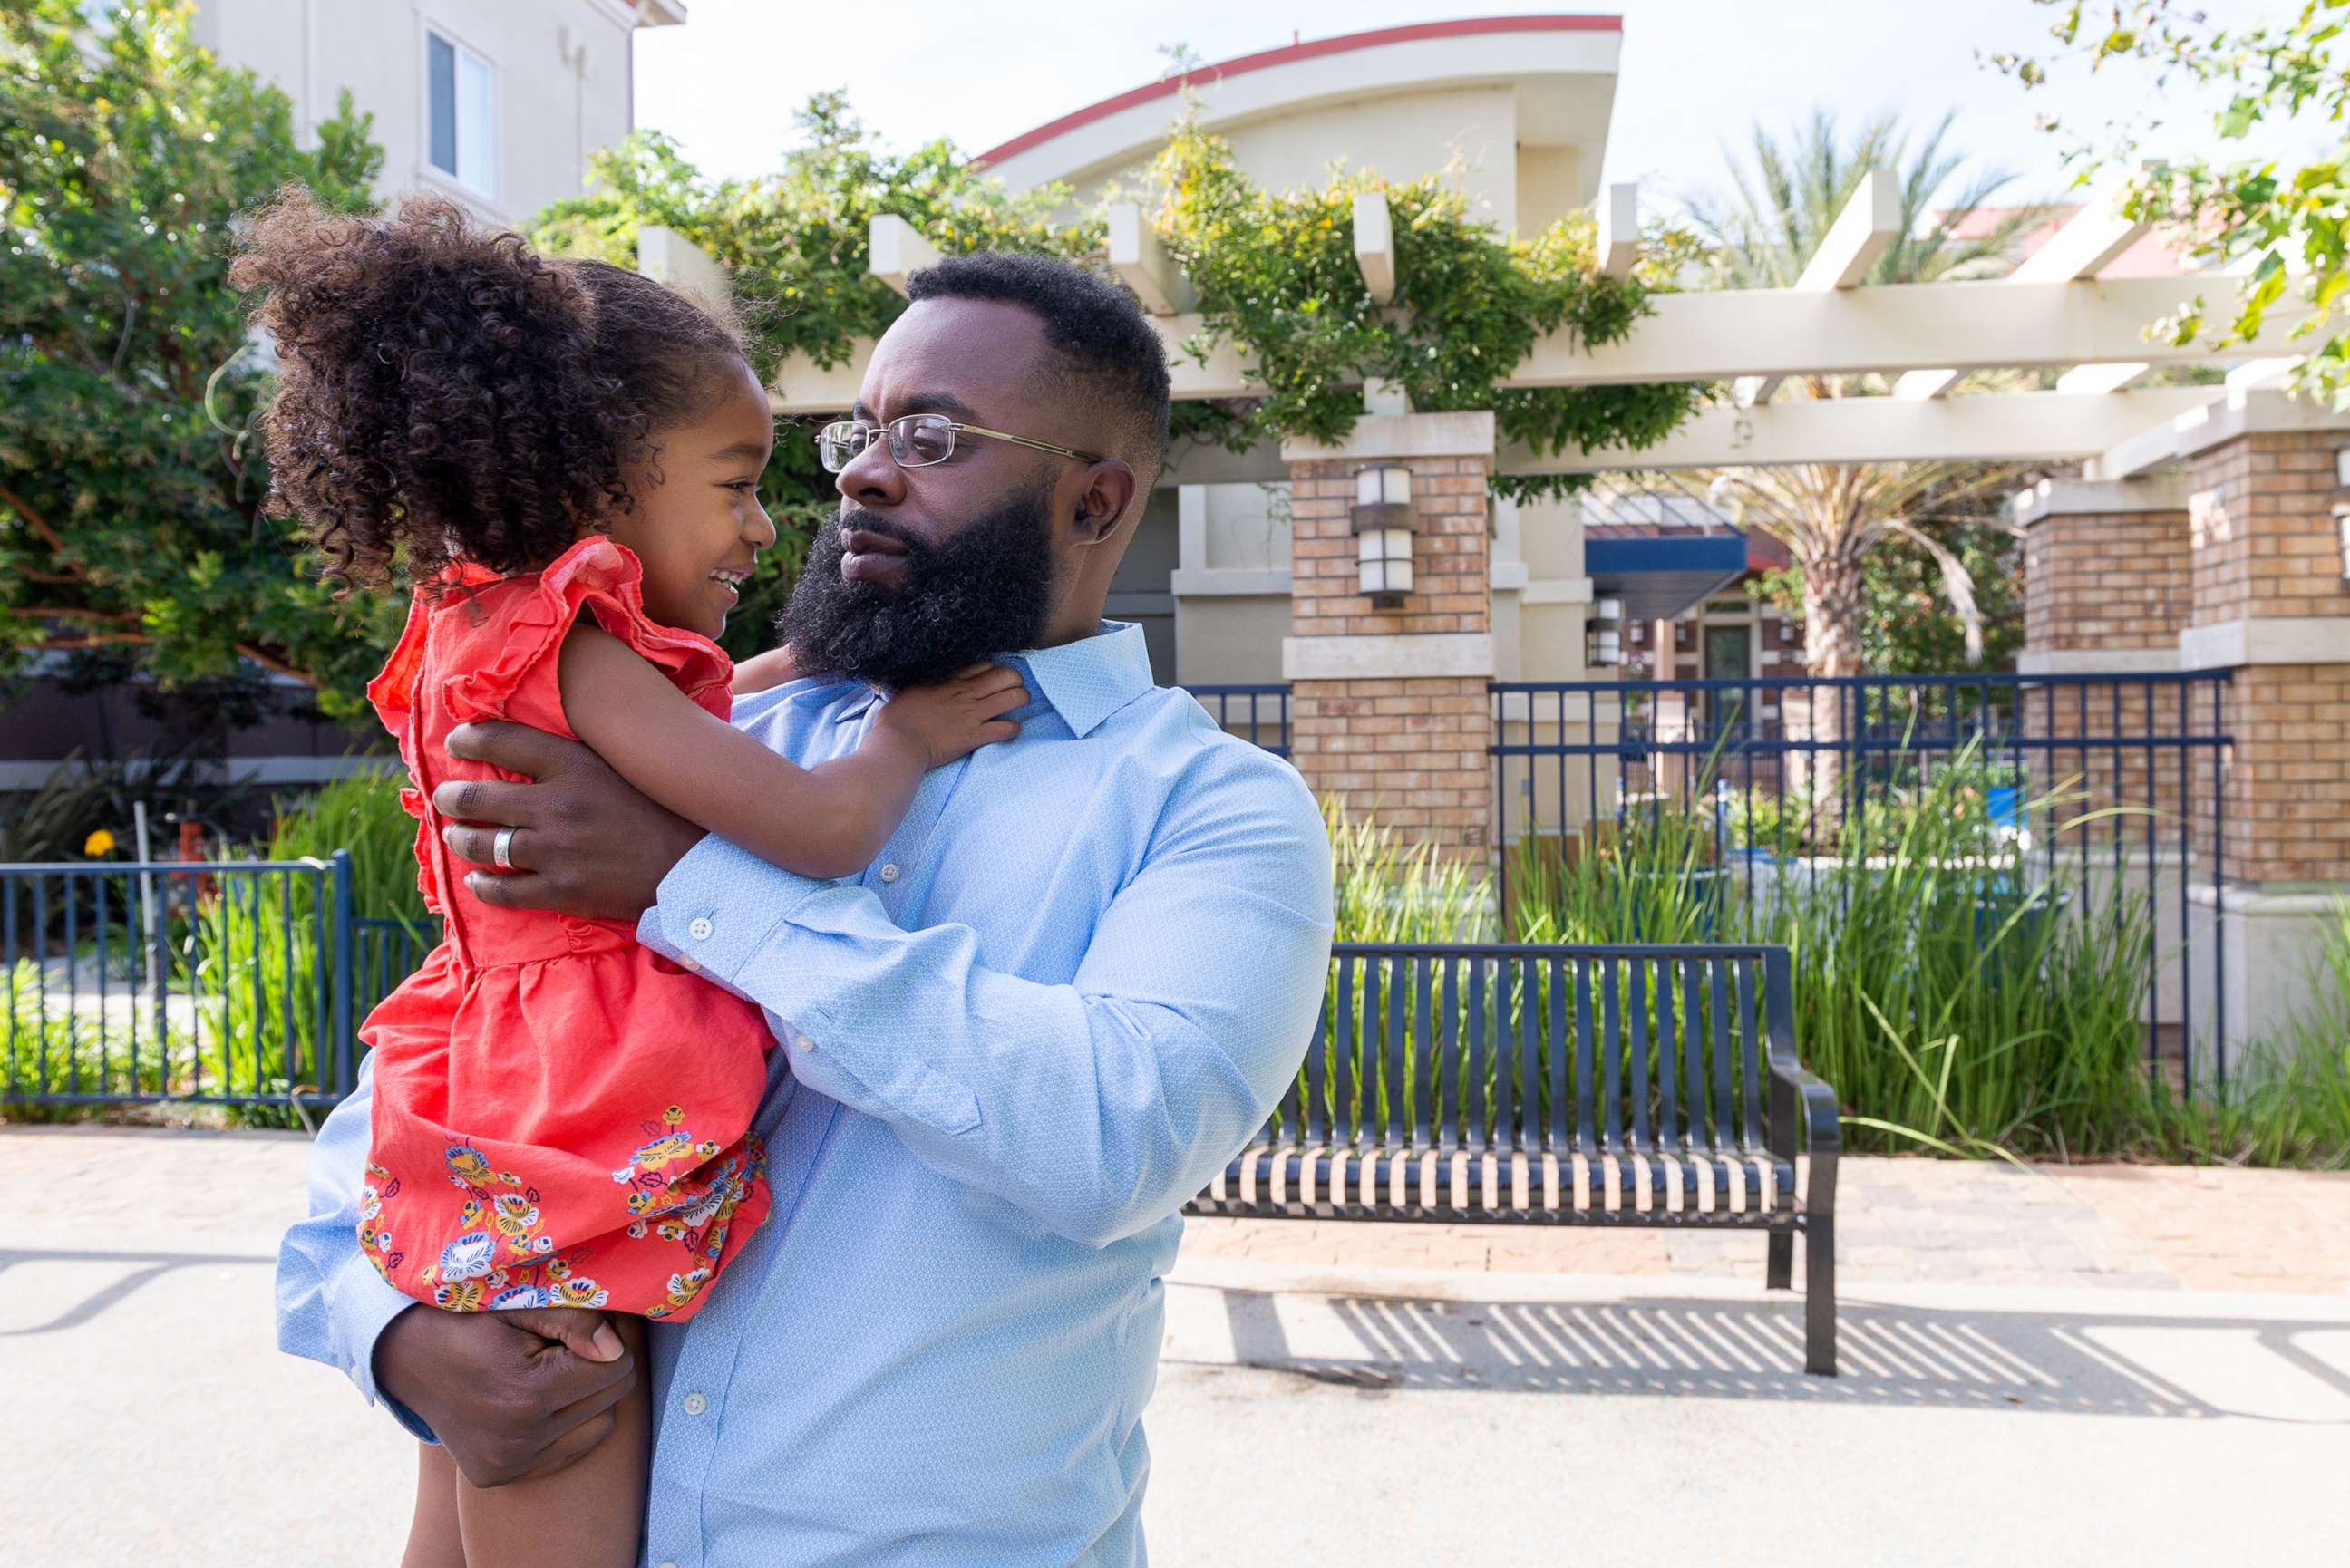 PHOTO: Walter Daniel plays with daughter Victoria near their apartment in Dublin, Calif., on Sept. 27, 2018.